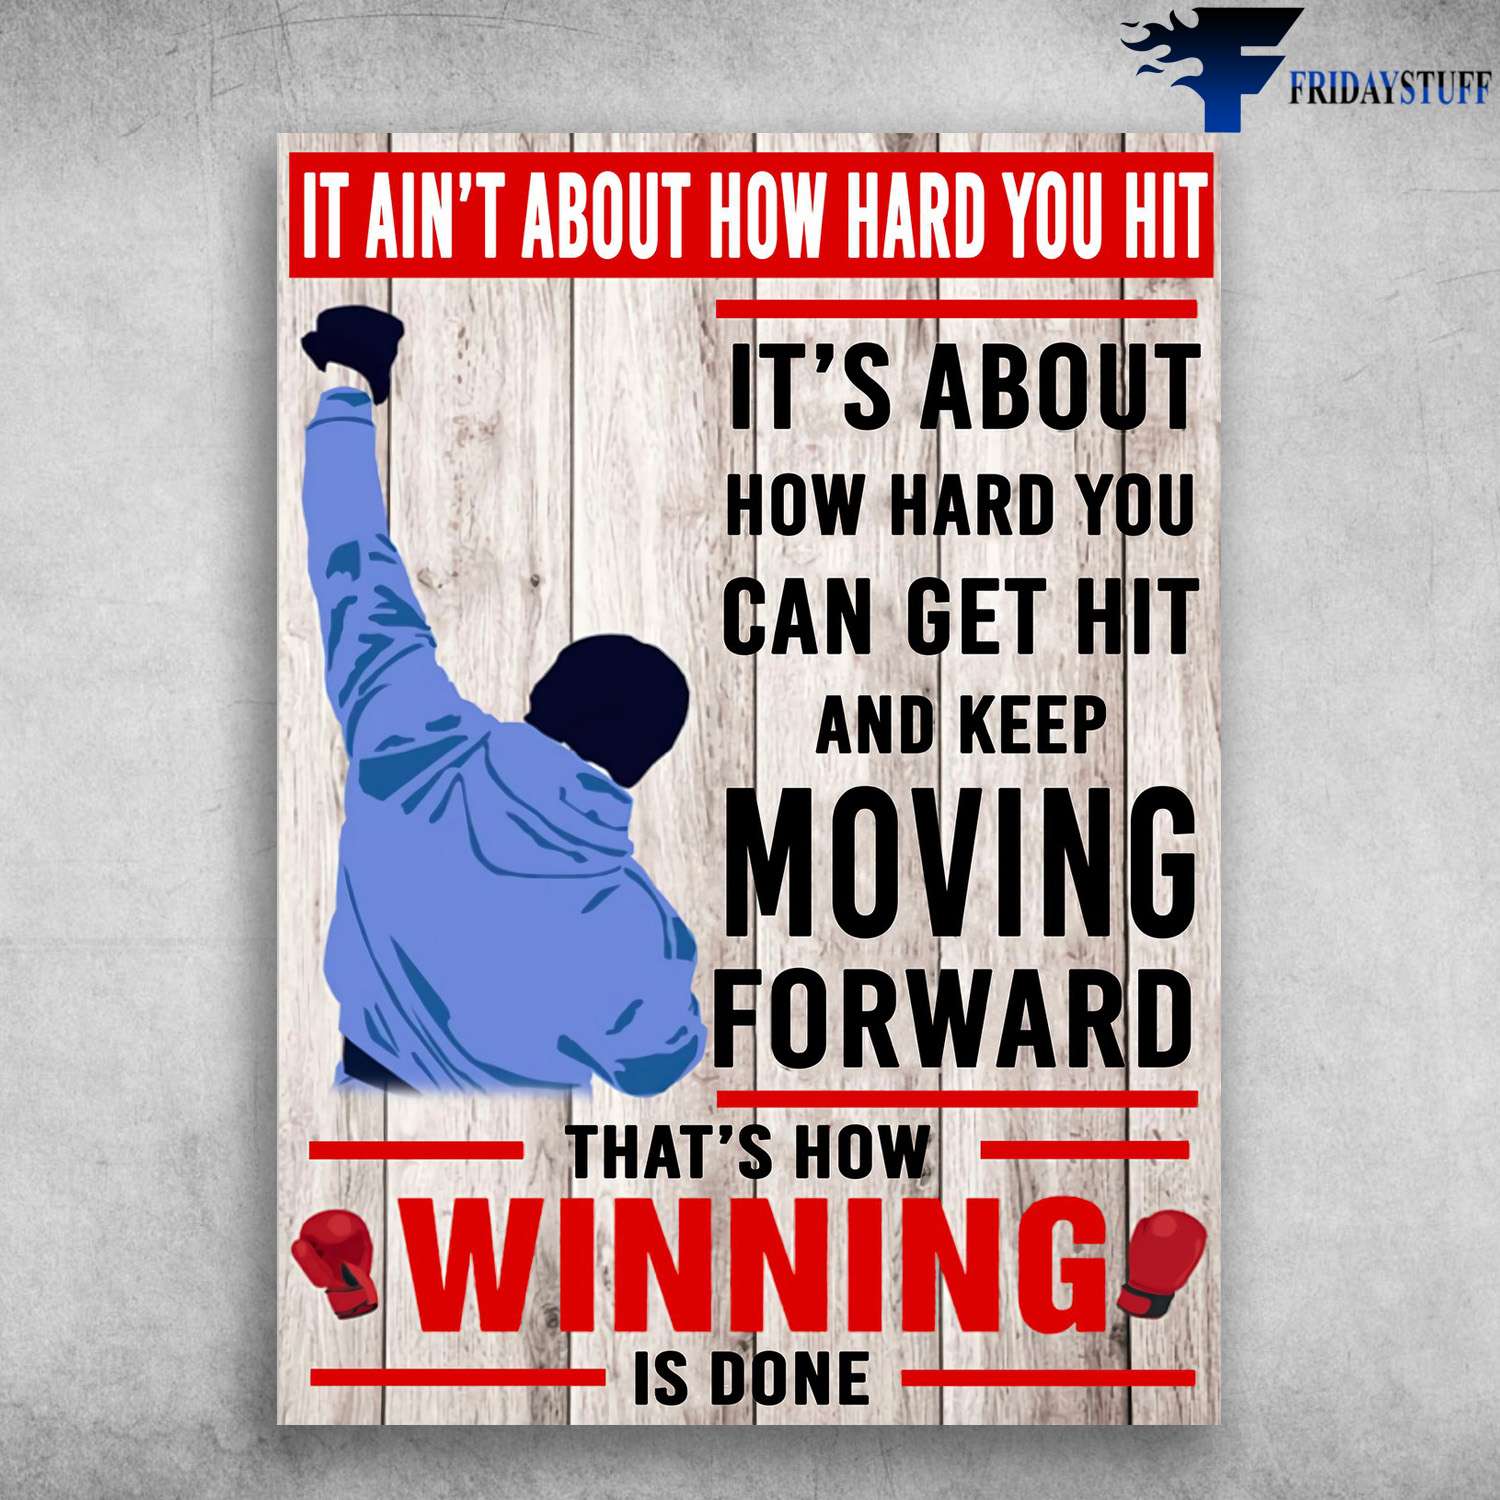 Boxing Poster - It Ain't About How Hard You Hit, It's About How Hard You Can Get Hit, And Keep Moving Forward, That's How Winning Is Done